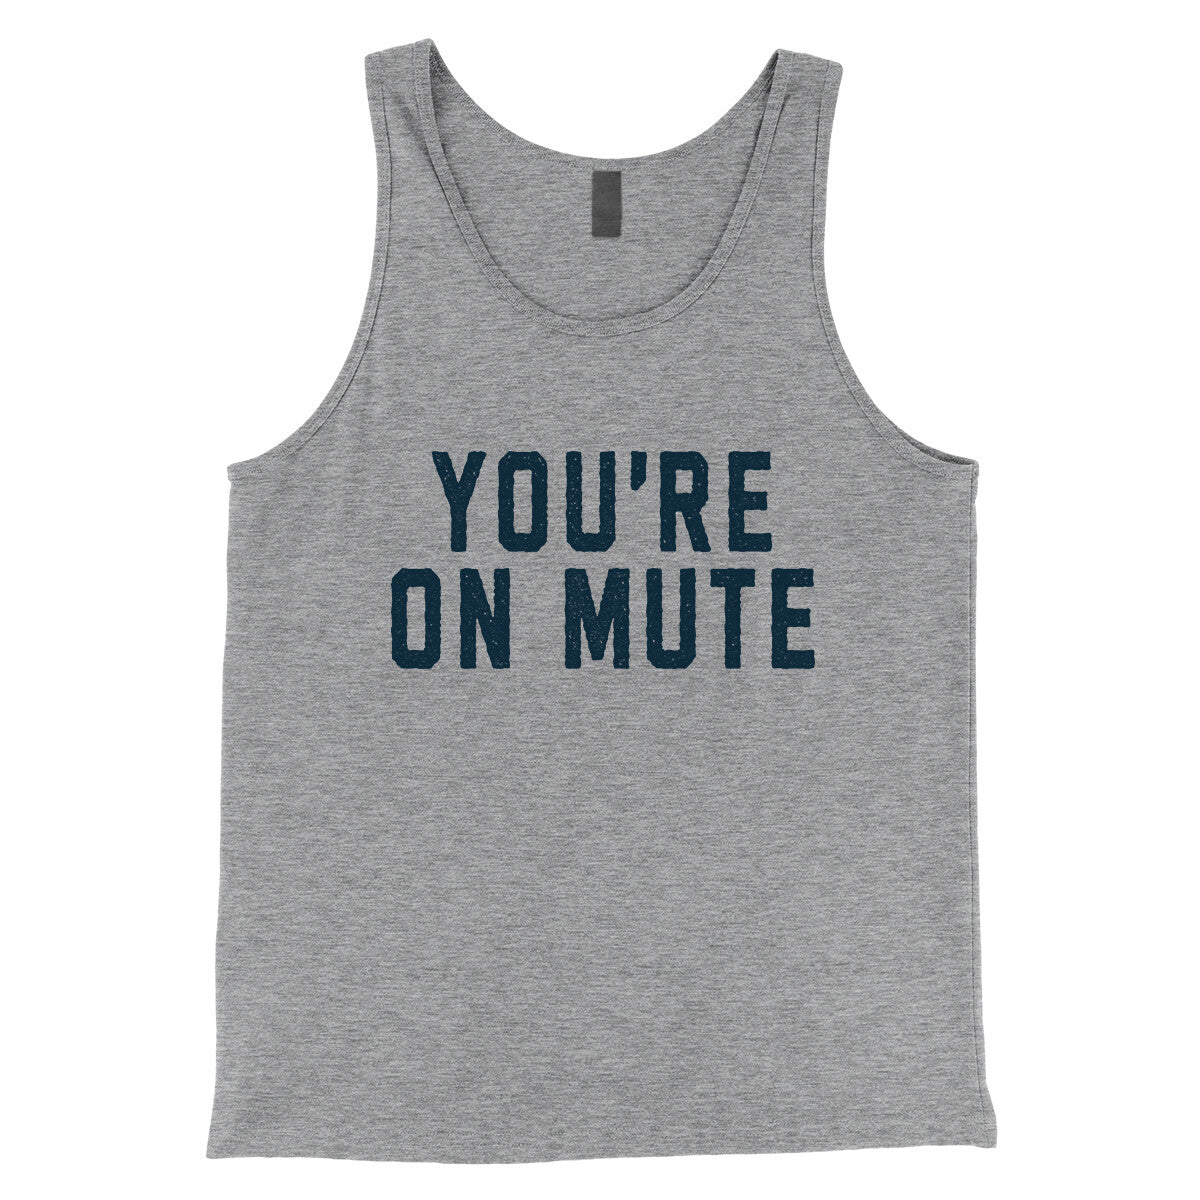 You're on Mute in Athletic Heather Color